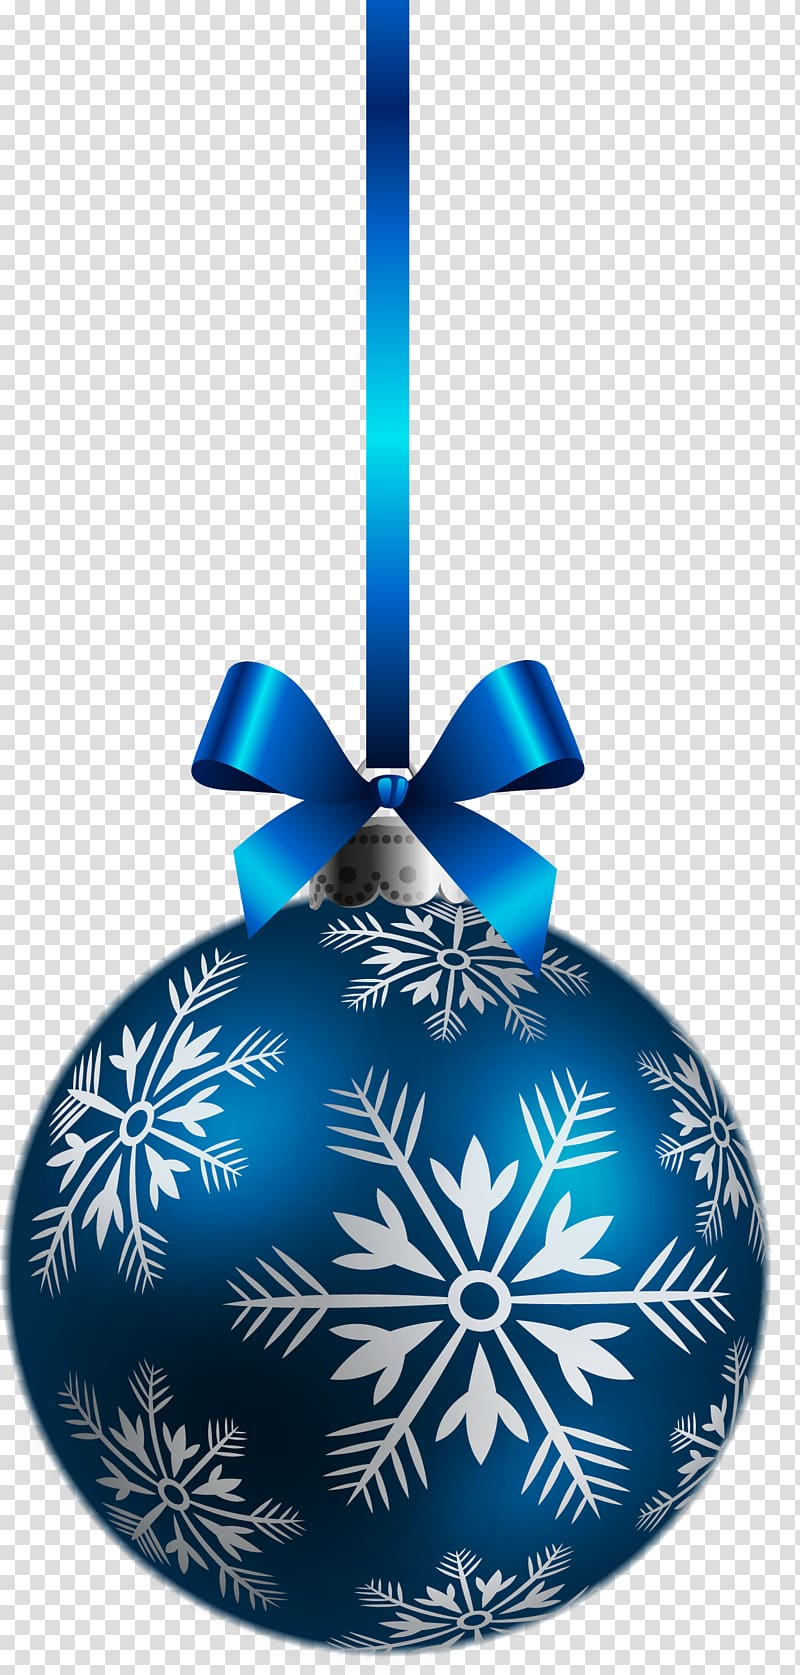 Christmas ornament Christmas decoration , Large Blue Christmas Ball Ornament , blue and white bauble transparent background PNG clipart